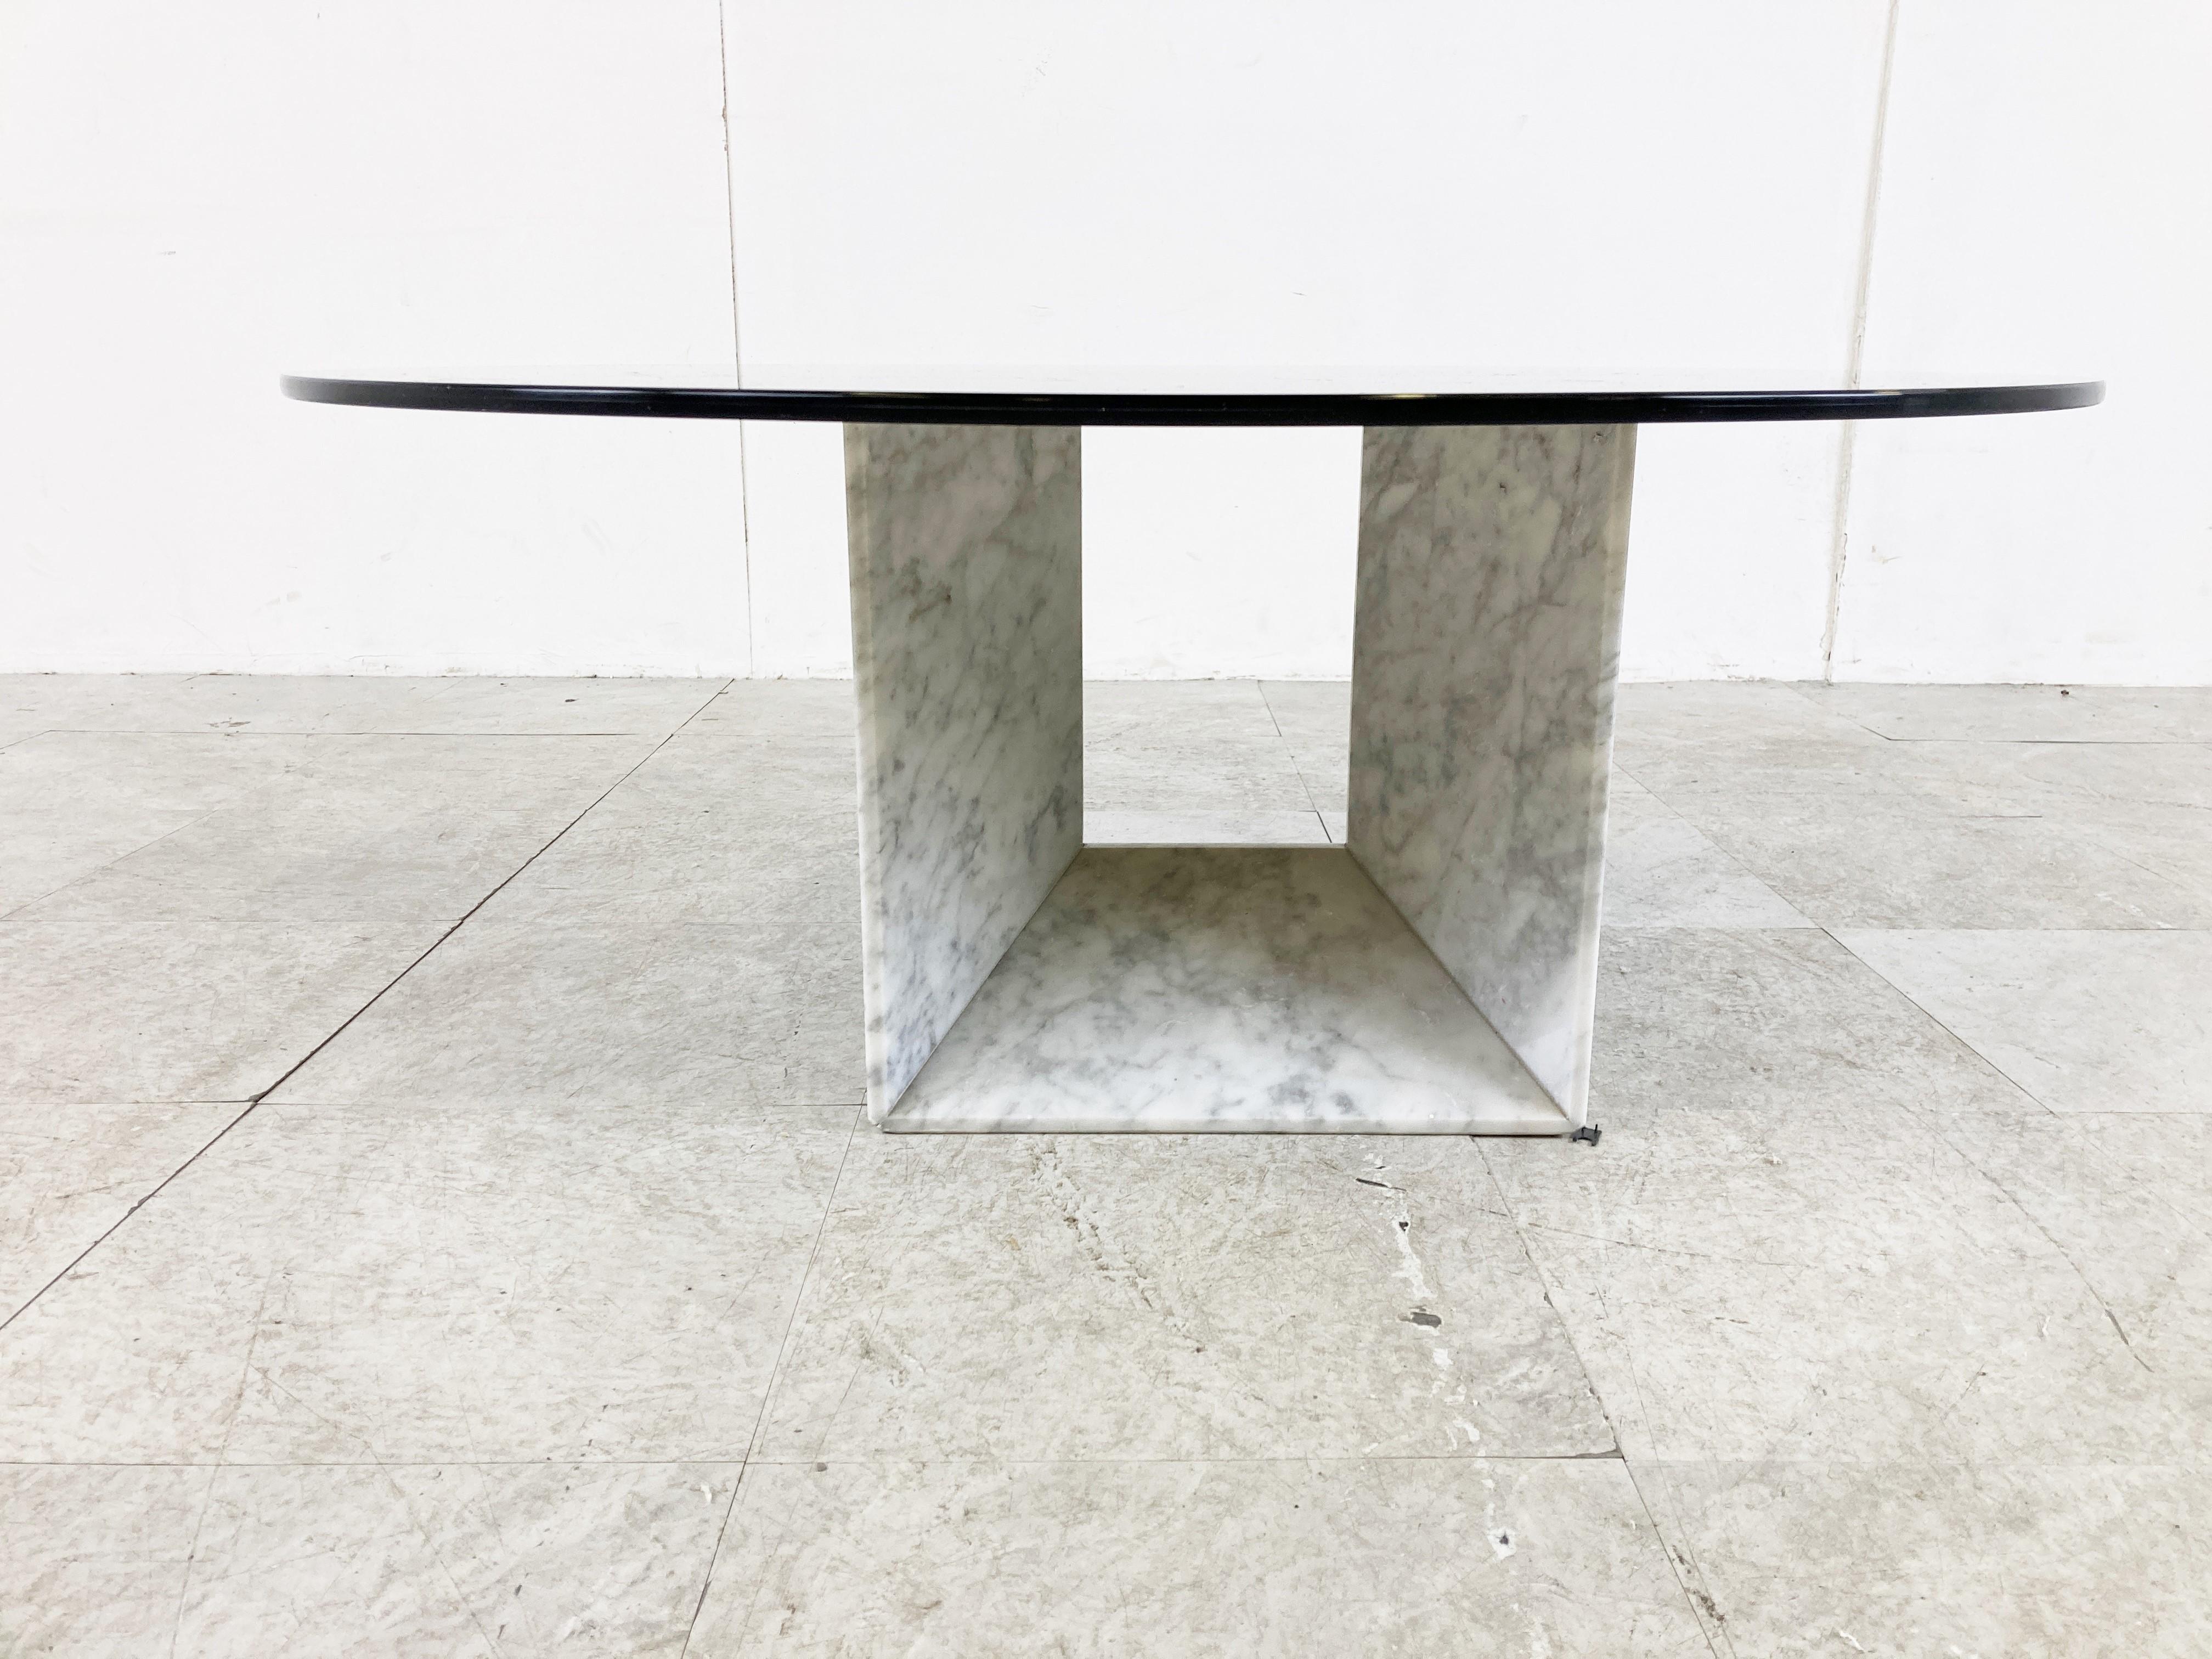 Vintage white marble coffee table with a round smoked glass top.

The marble base has some nice veining

Timeless piece to be combined with most interiors.

Good condition

We can ship the base only to save shipping costs. 

1970s - Italy